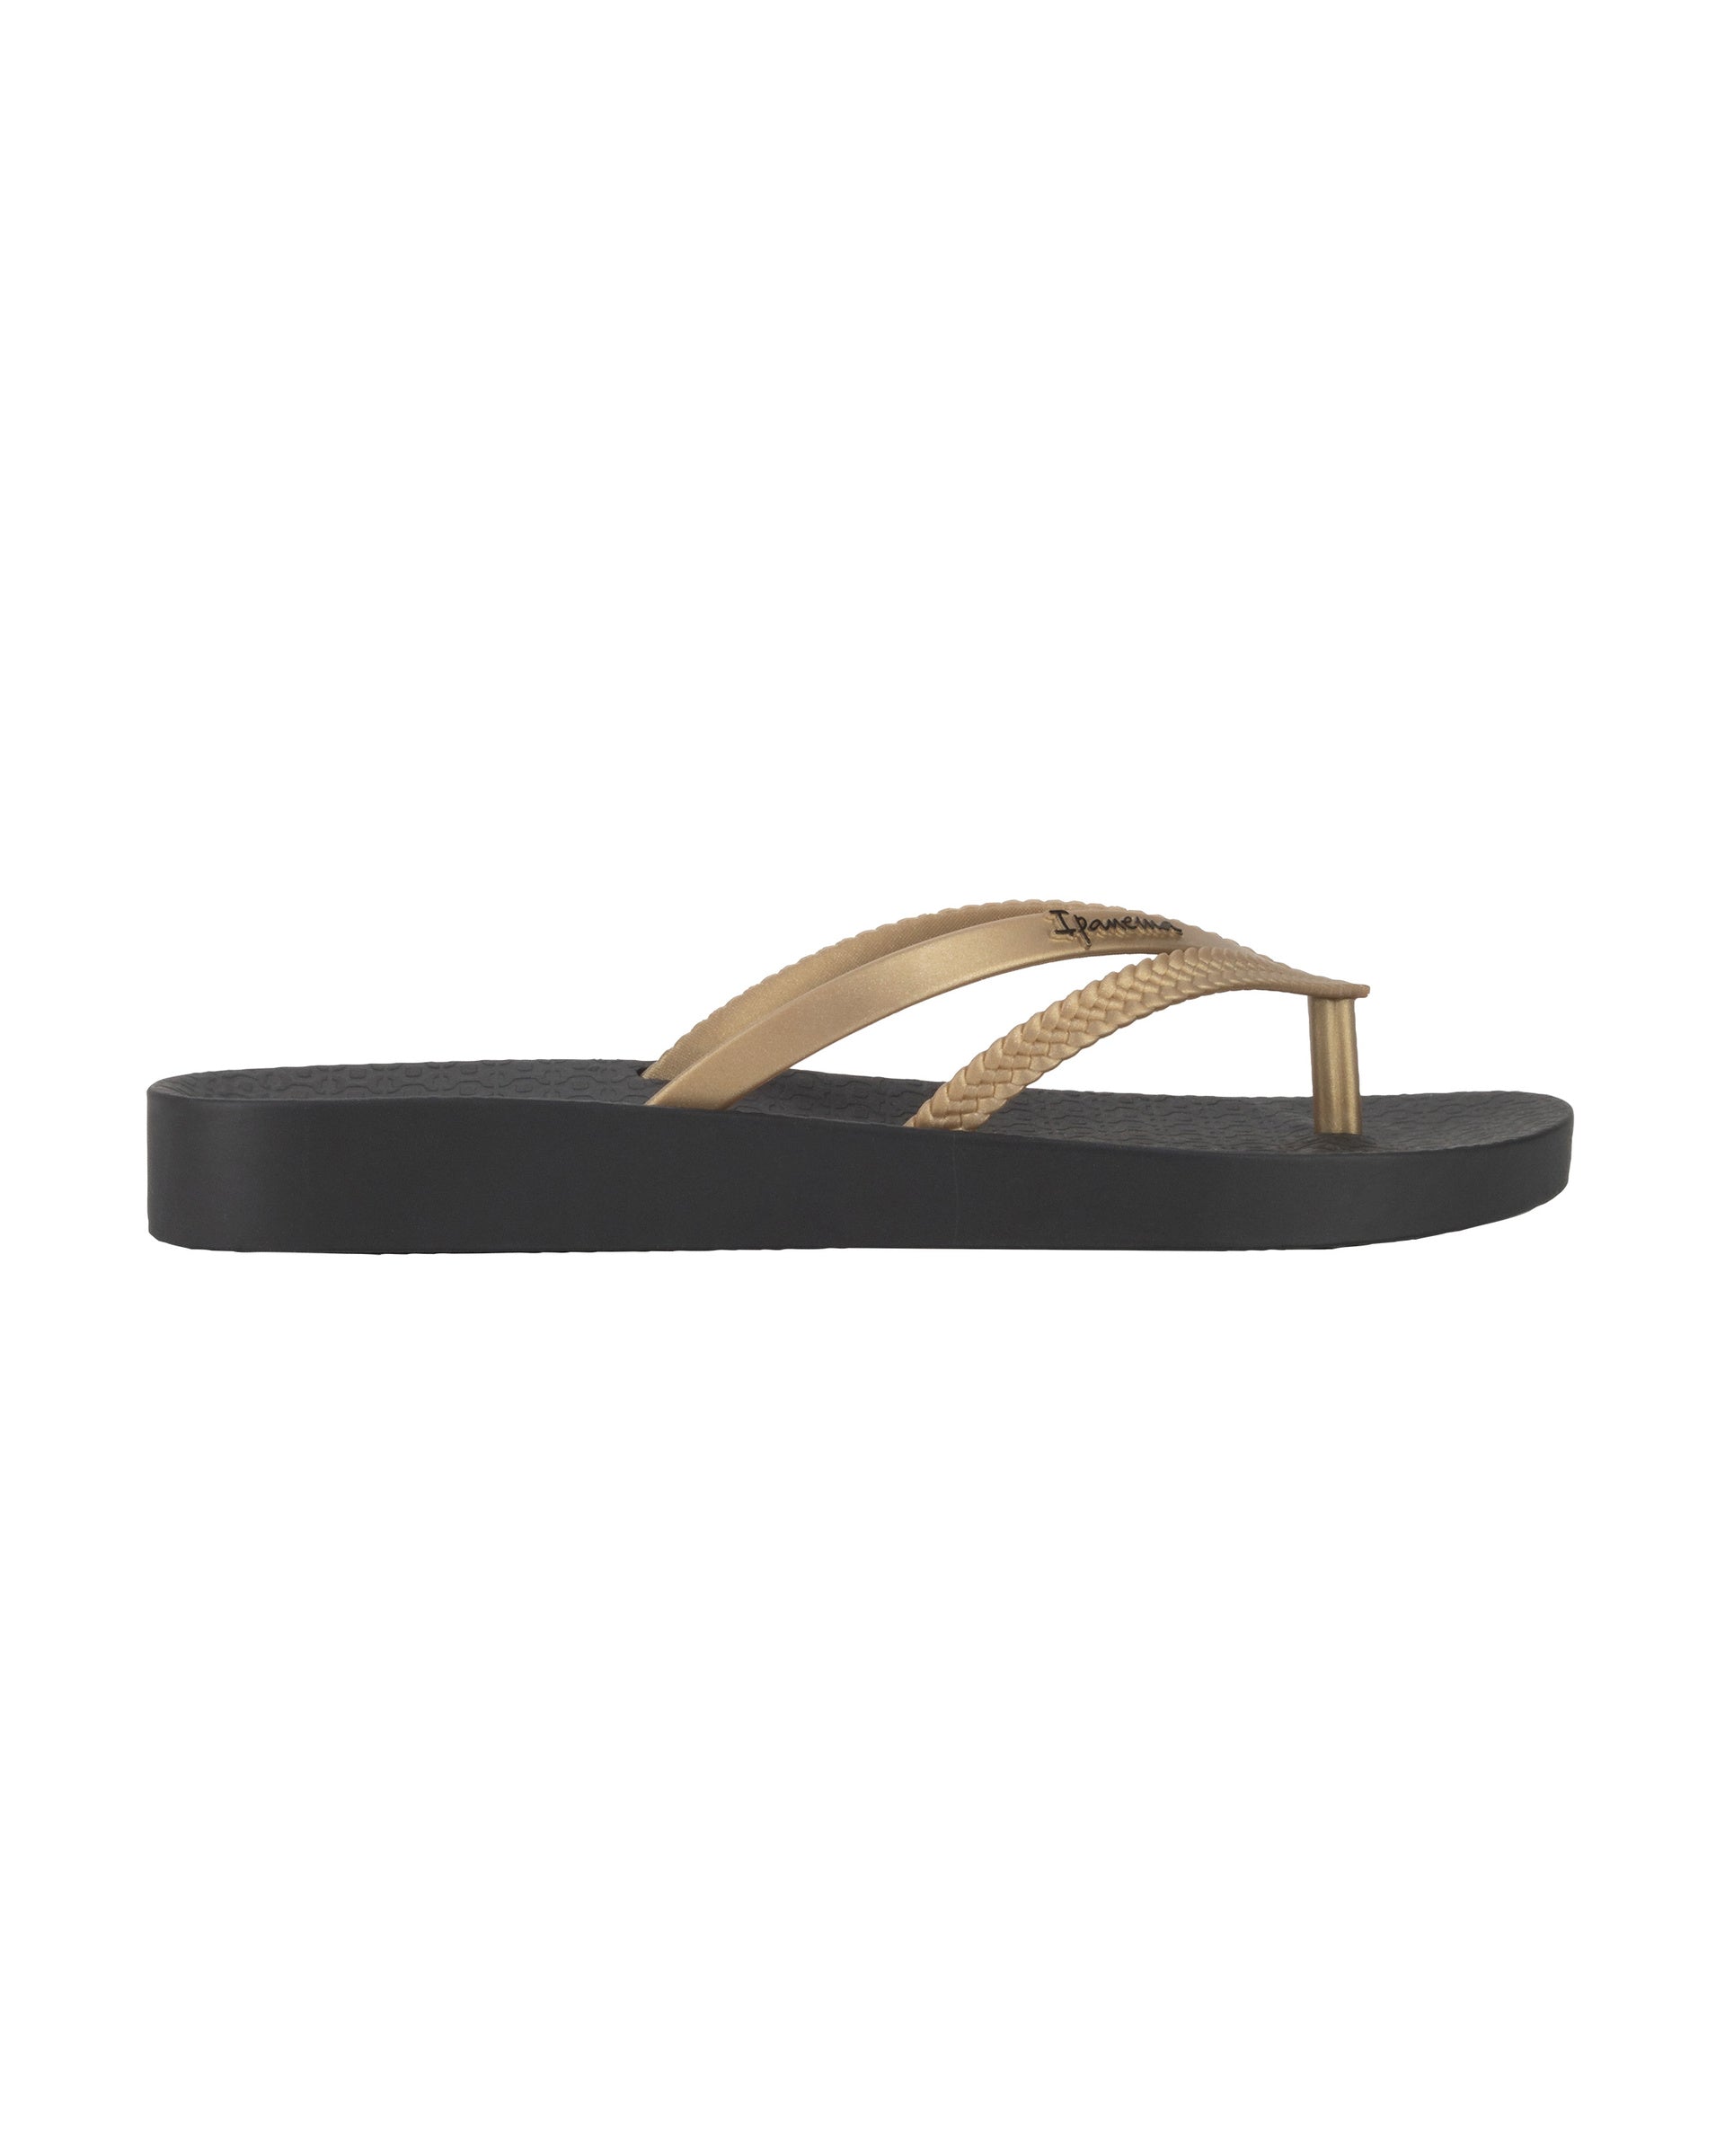 Outer side view of a black Ipanema Bossa Soft women's flip flop with metallic gold straps.